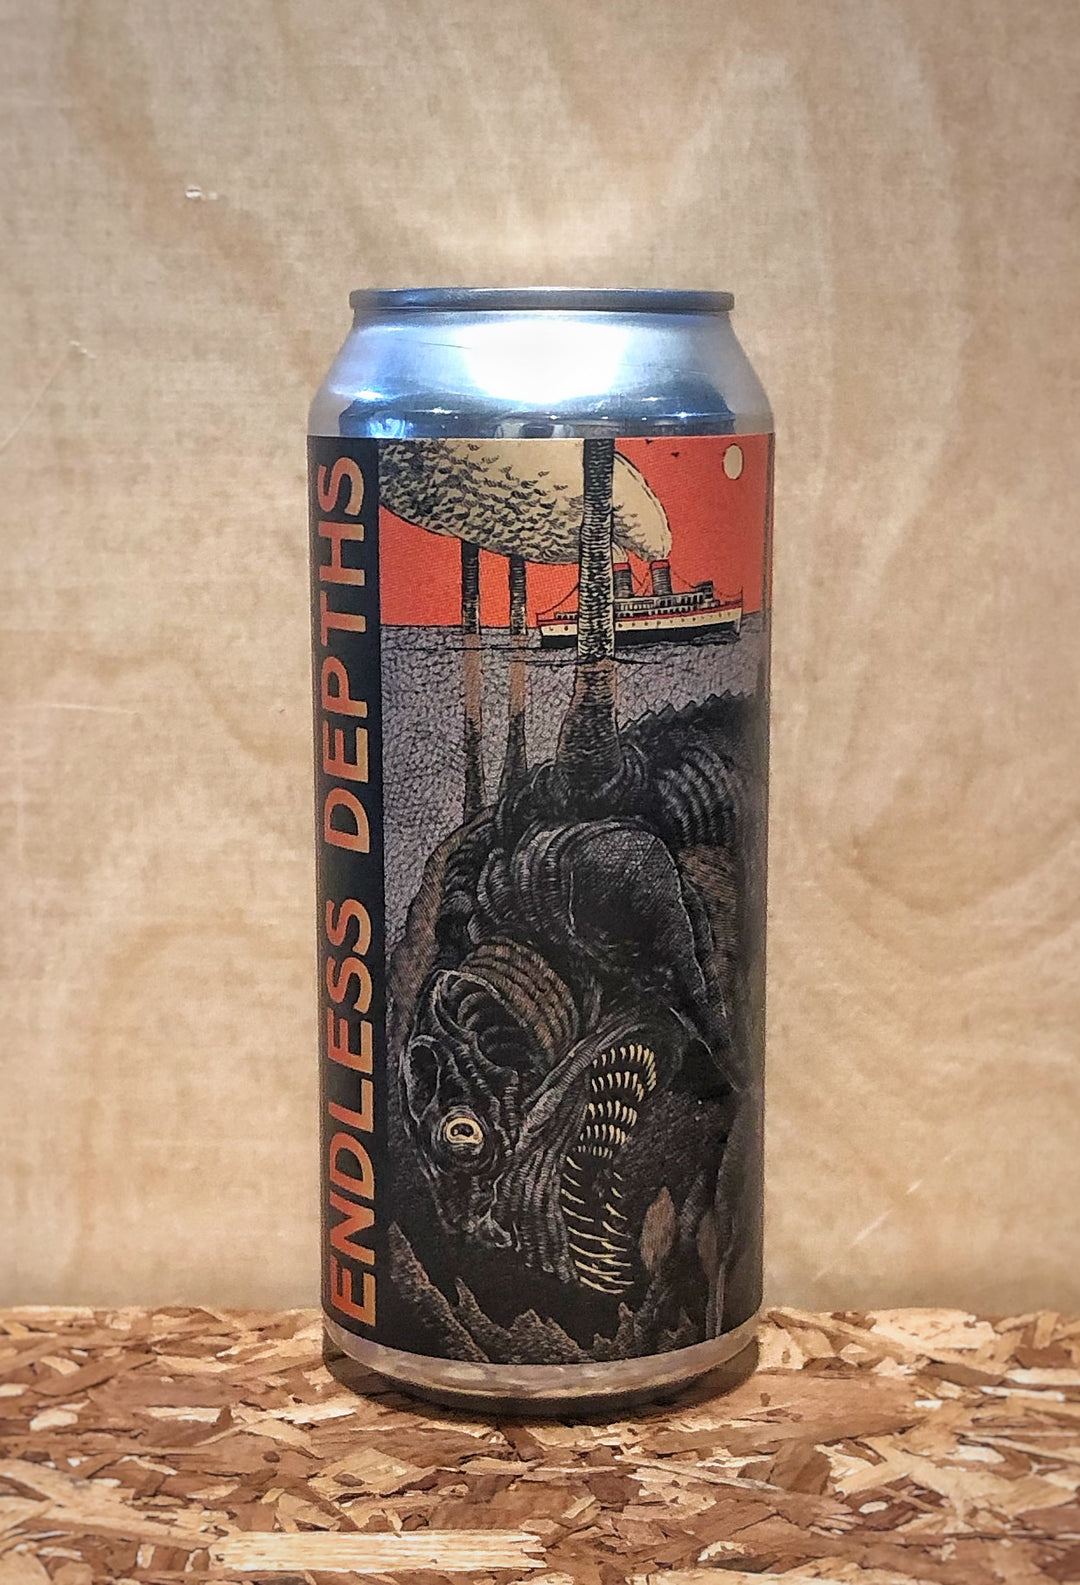 Abomination Brewing Co. 'Endless Depths' Gose Style Ale with Prickly Pear, Calamansi, Mango & Black Lava Sea Salt (North Haven, CT)